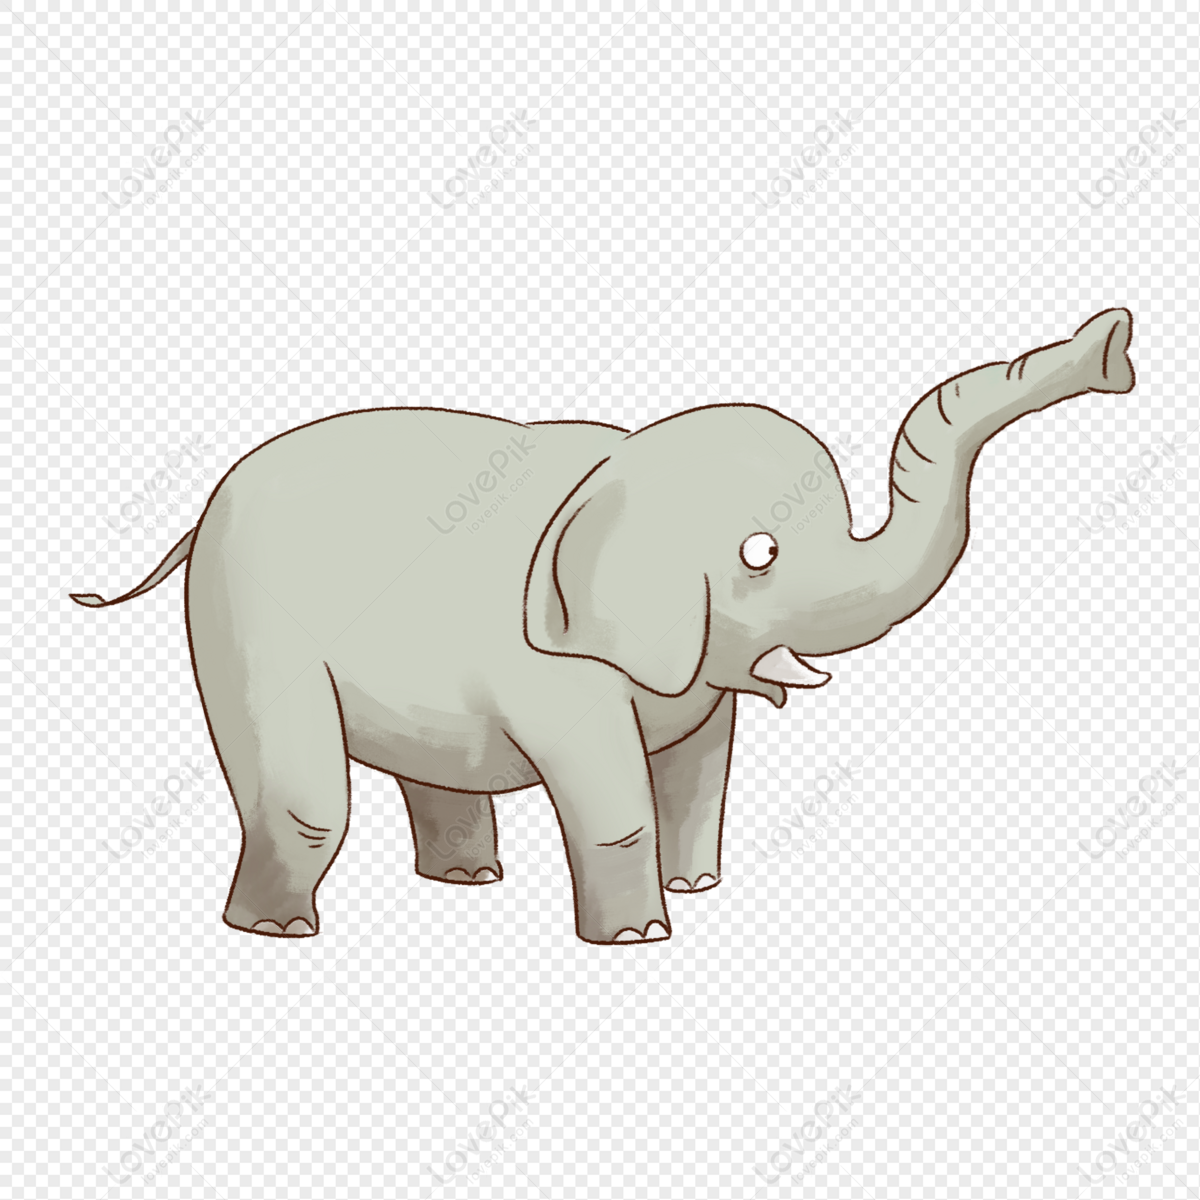 Elephant, African Elephant, Anime, African Animals PNG Transparent Image  And Clipart Image For Free Download - Lovepik | 401566997